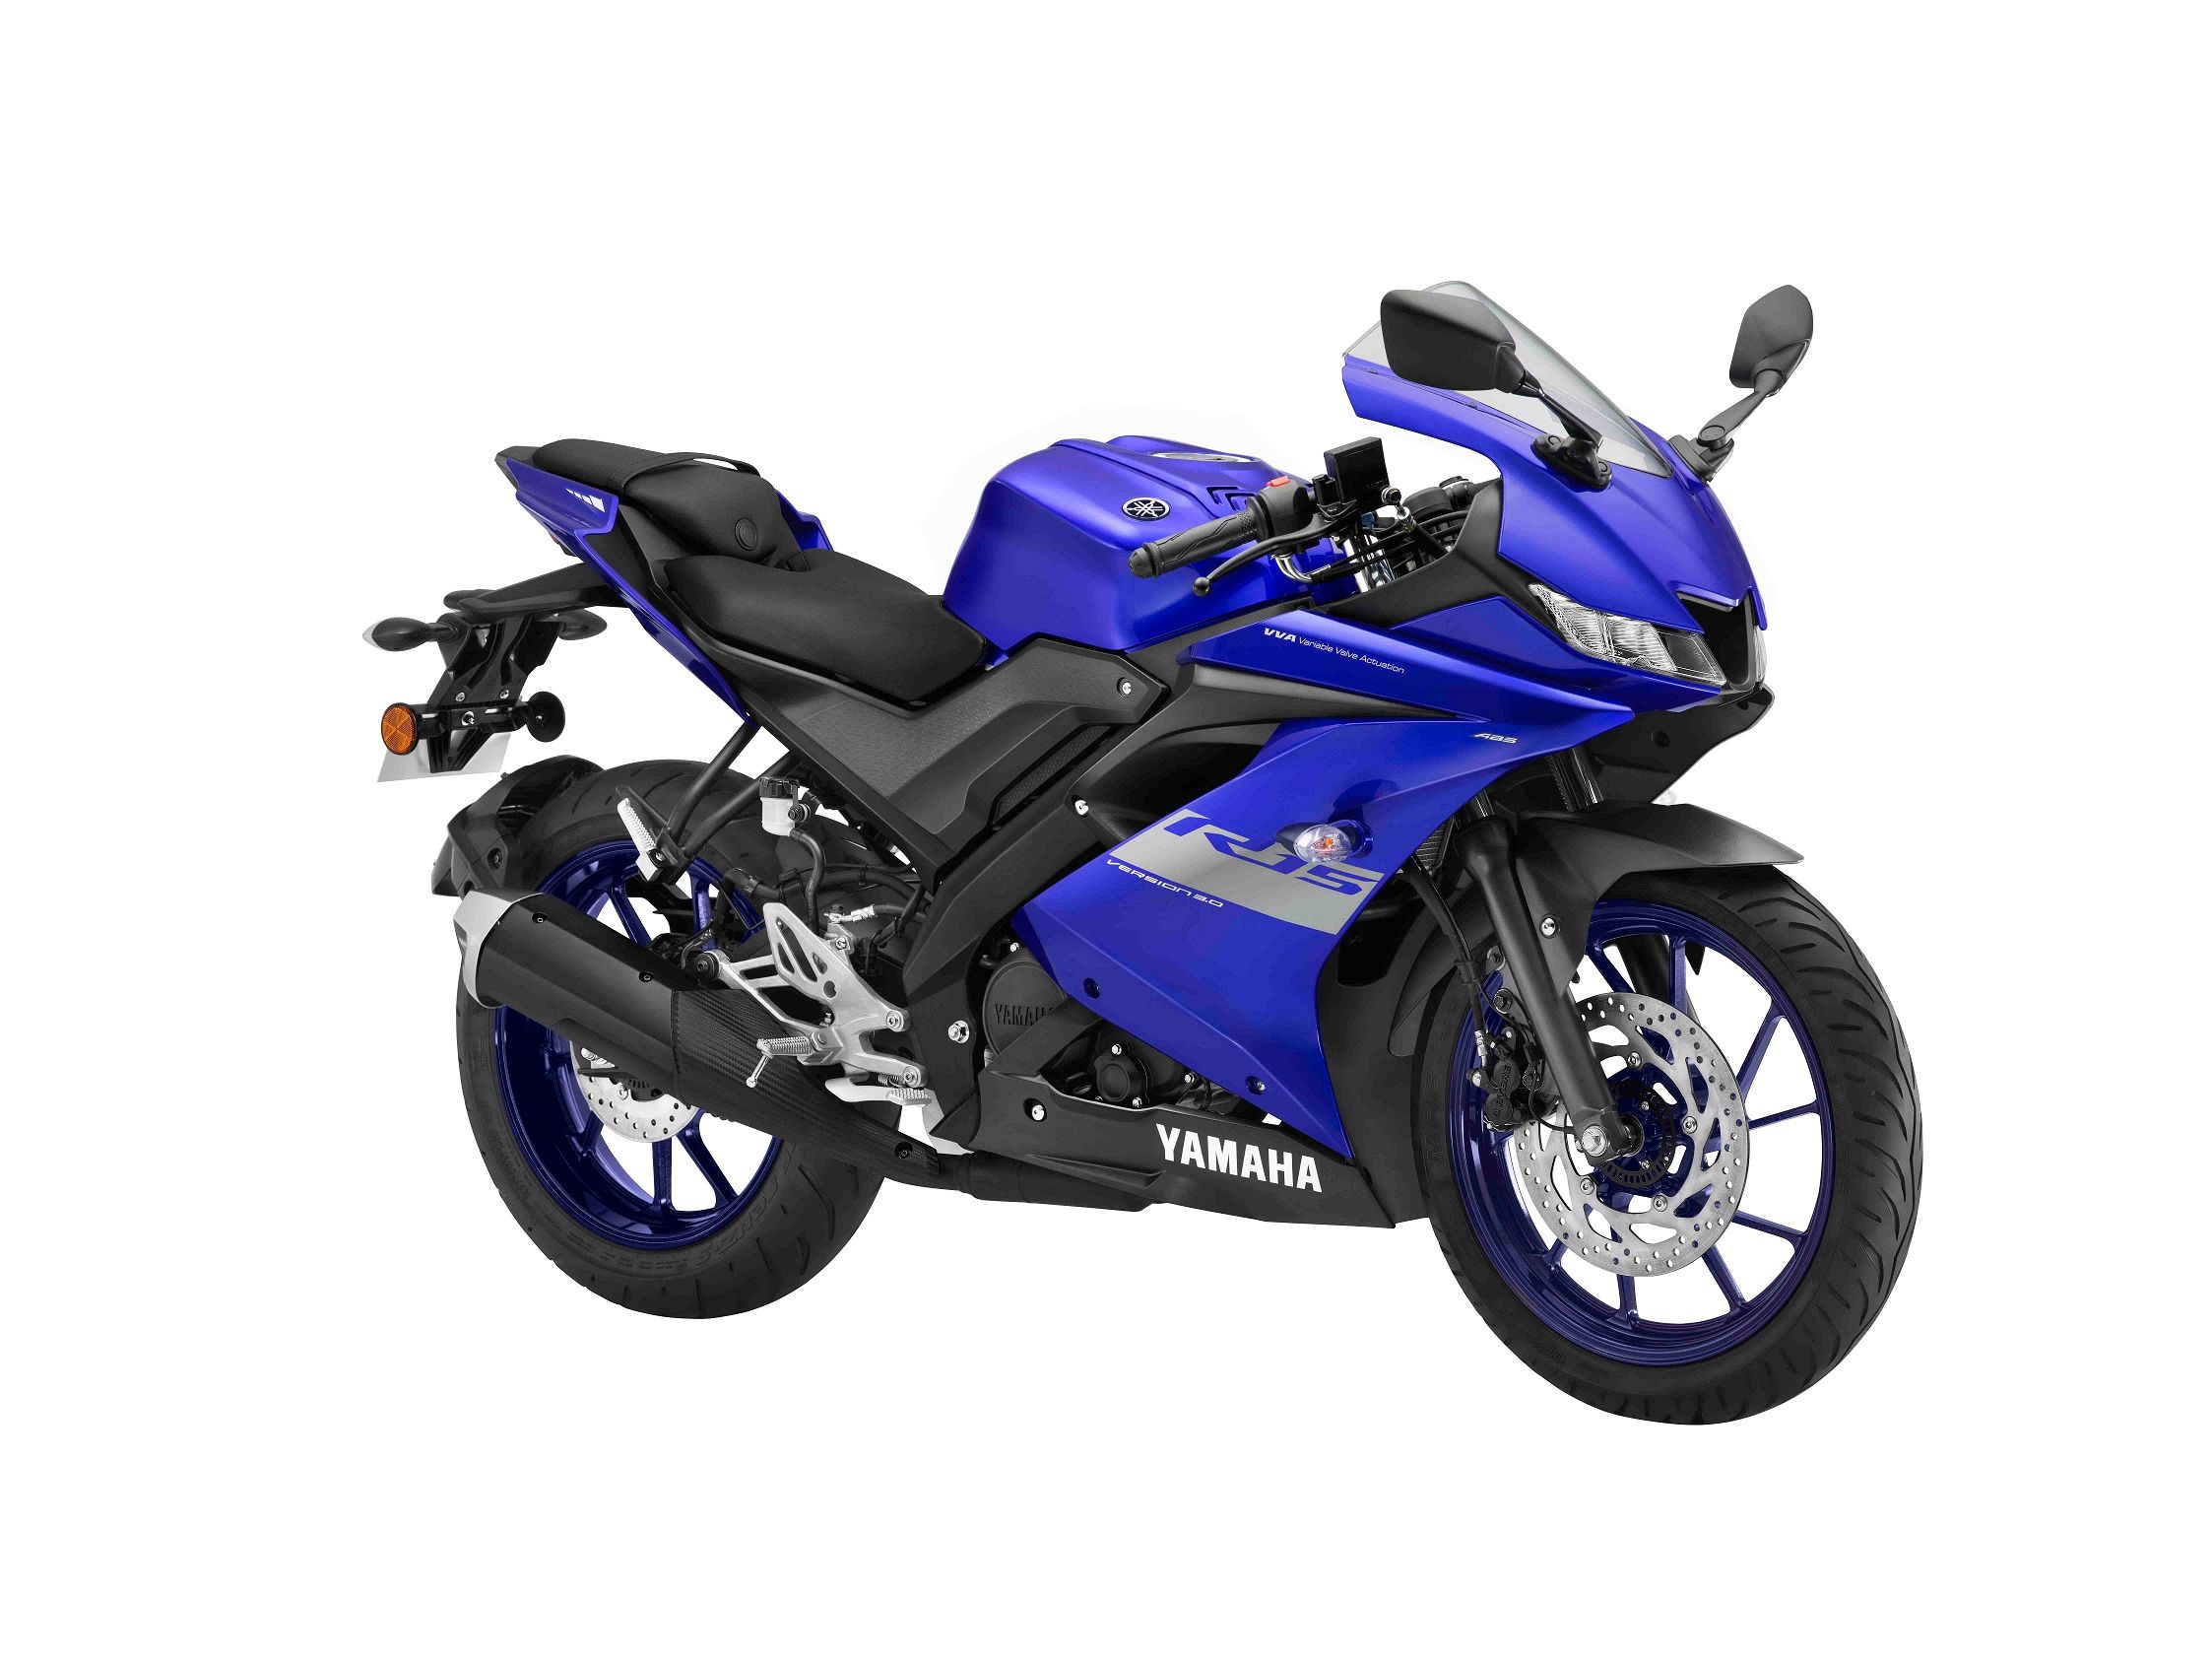 BS6 Yamaha R15 V3.0 Launched In India | BikeDekho